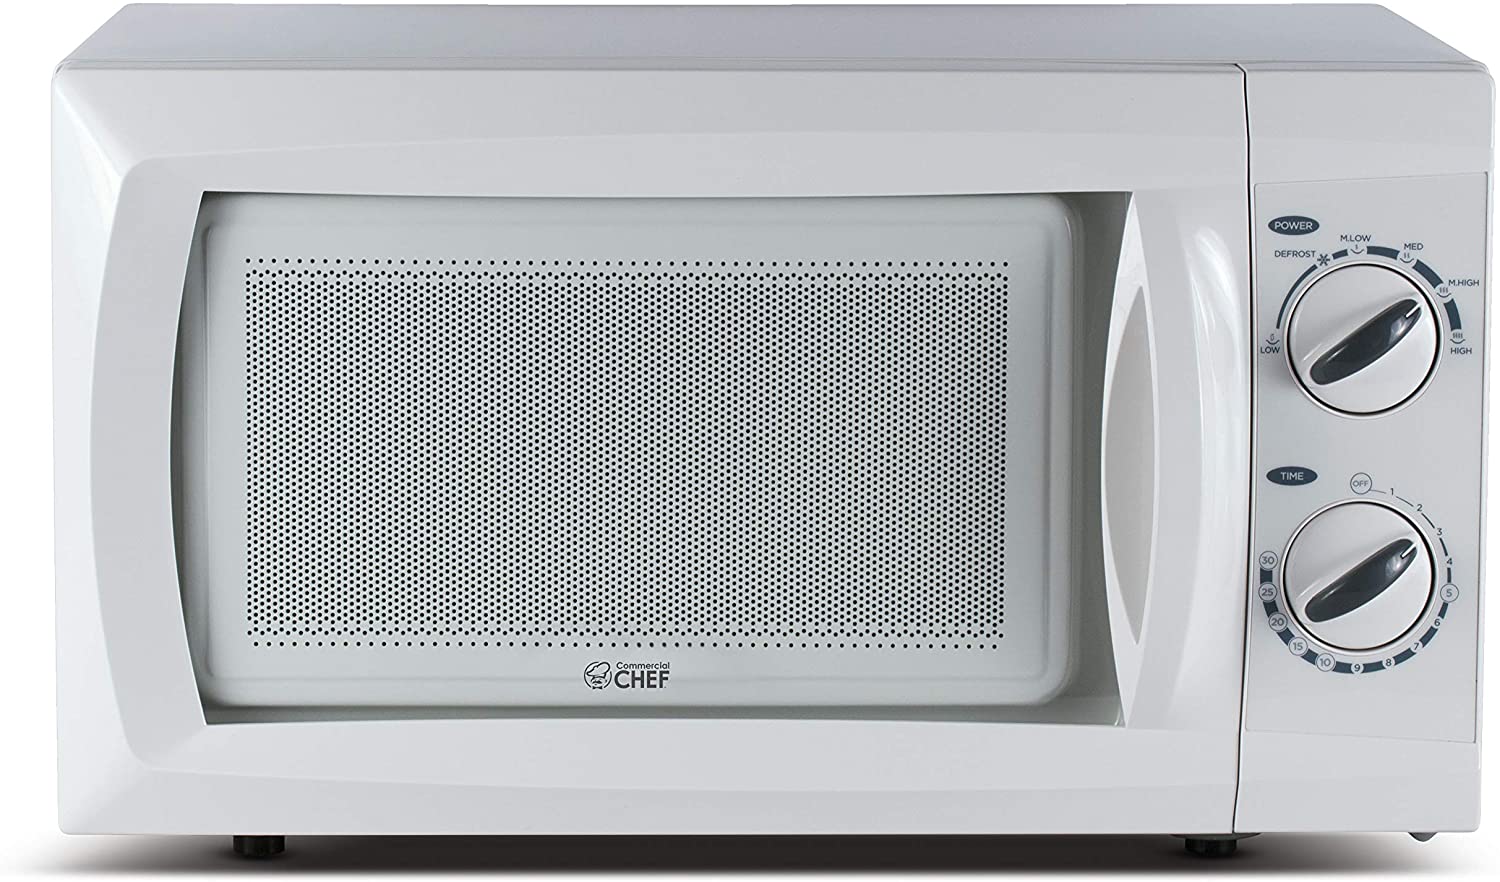 https://www.dontwasteyourmoney.com/wp-content/uploads/2020/05/commercial-chef-counter-top-rotary-portable-microwave-600-watt-portable-microwave.jpg